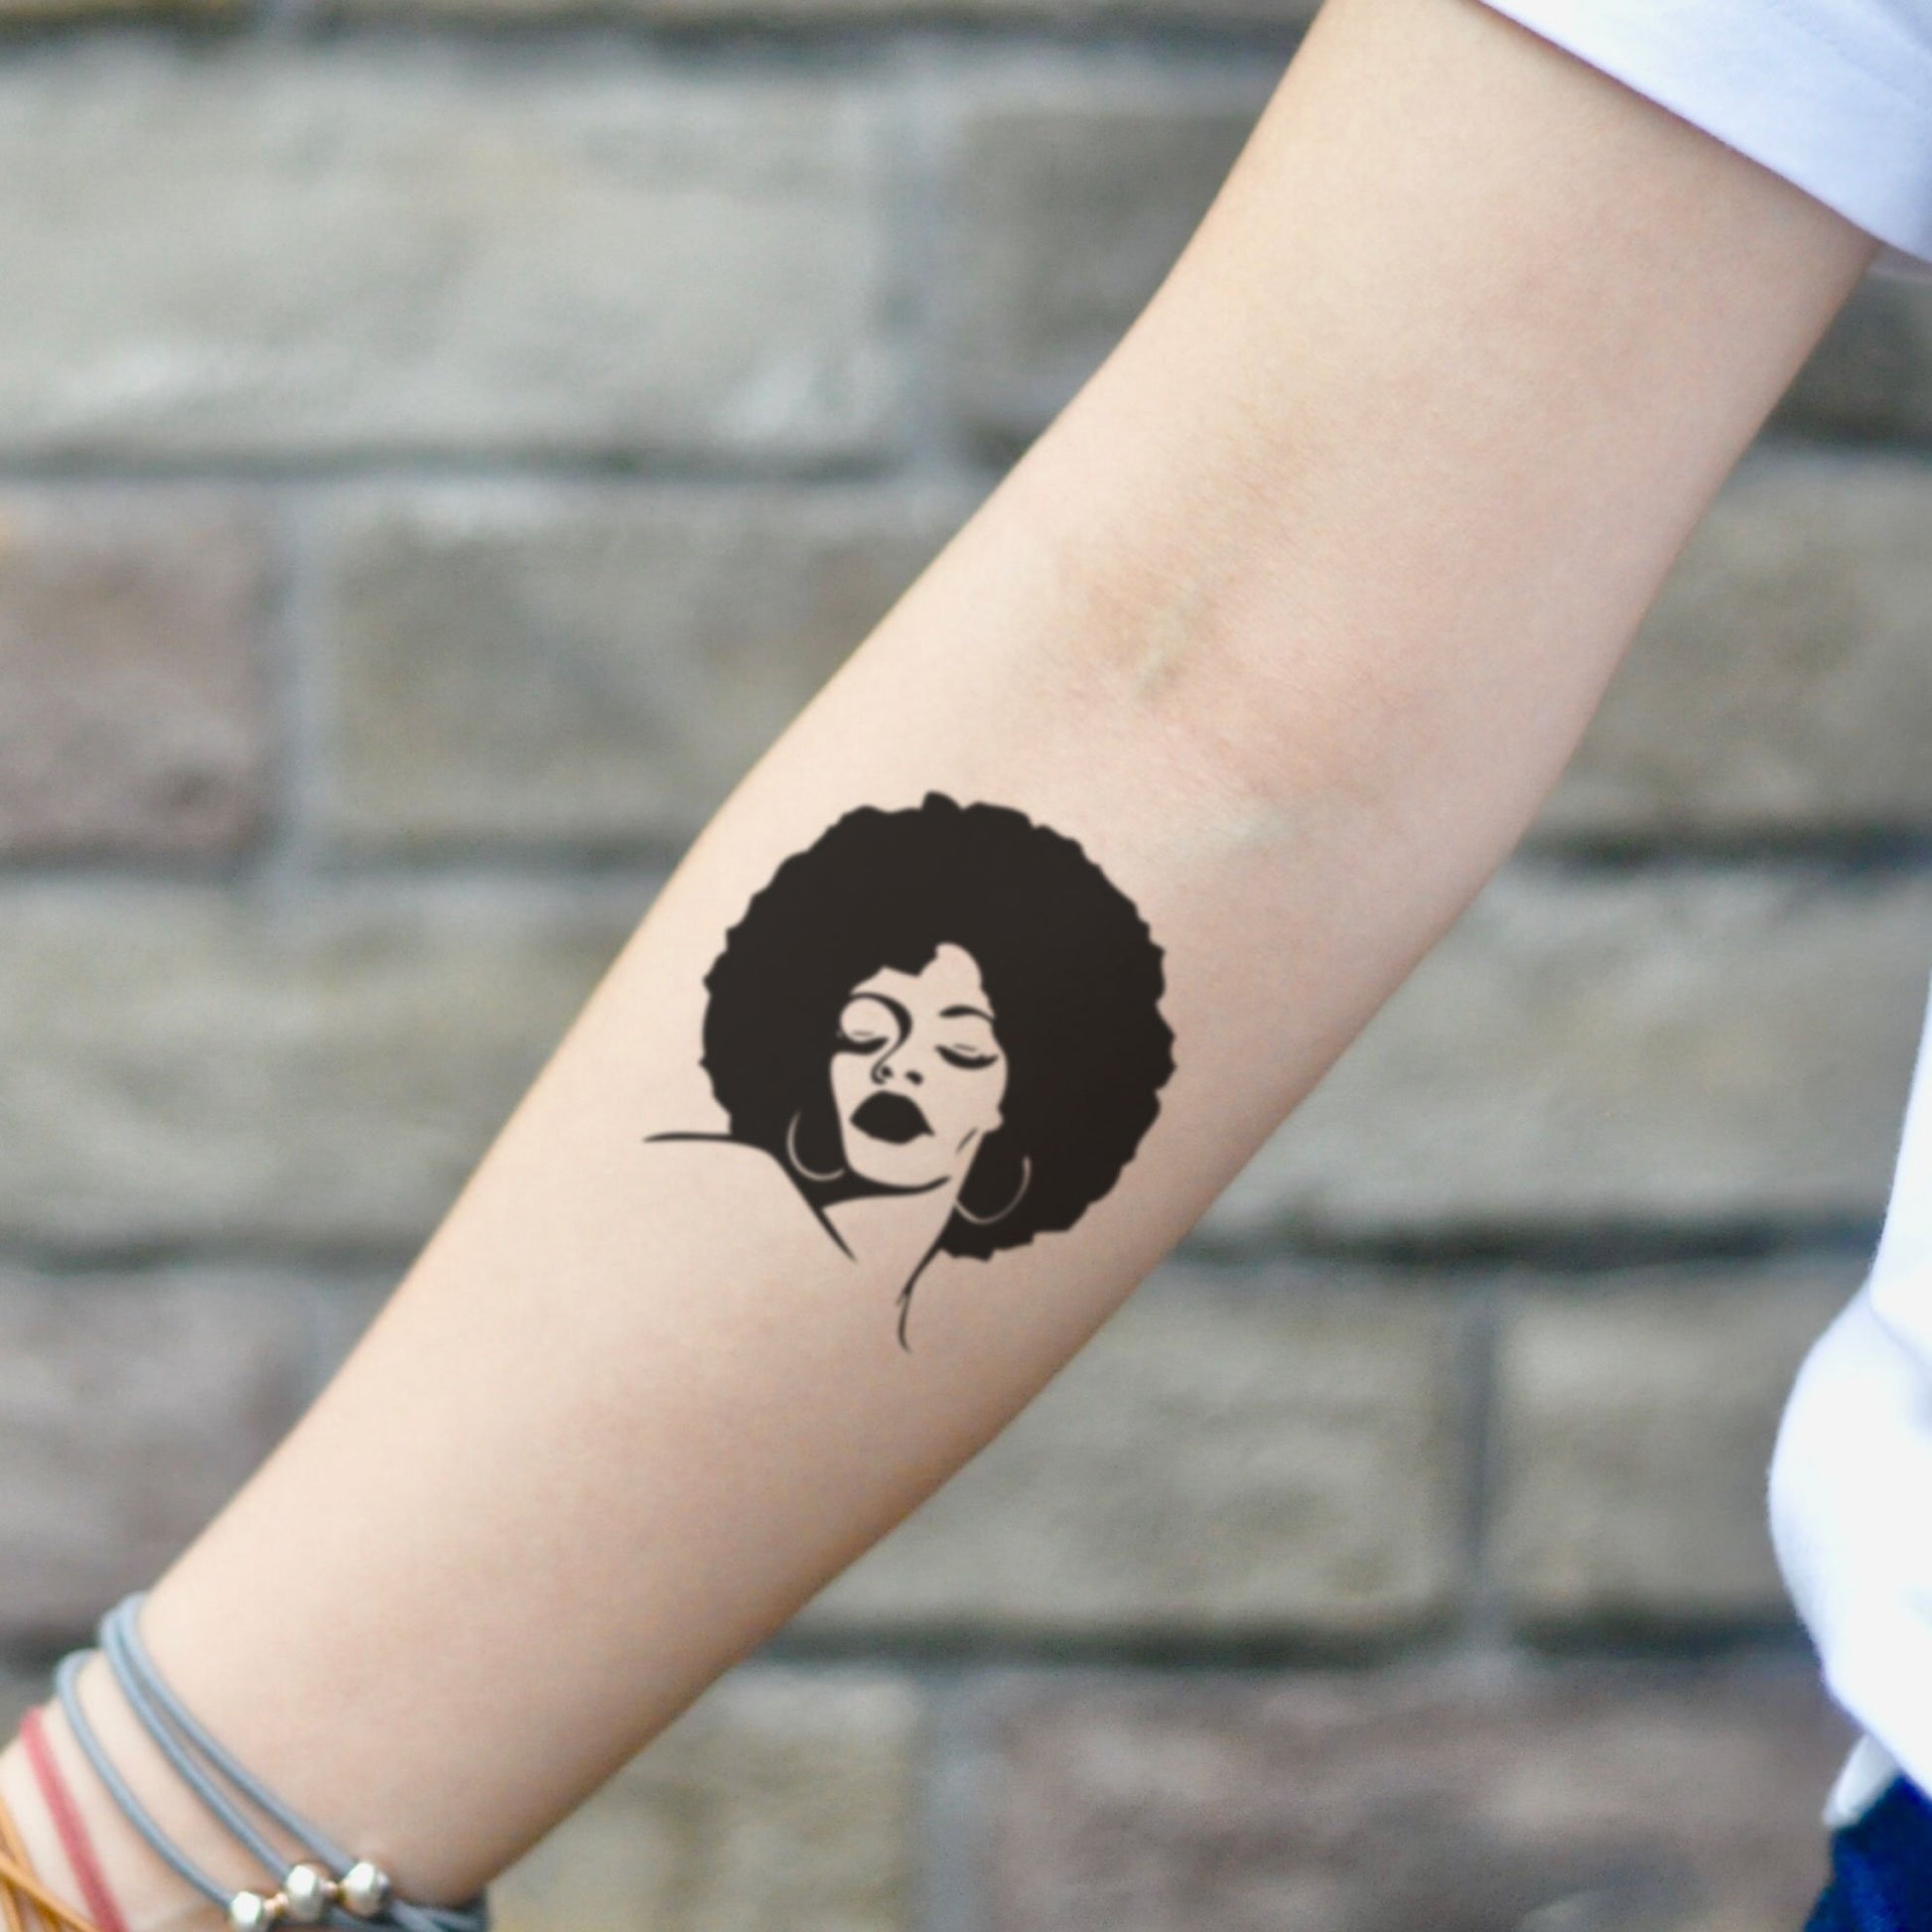 fake small afro afrocentric black lives matter woman lady people portrait temporary tattoo sticker design idea on inner arm